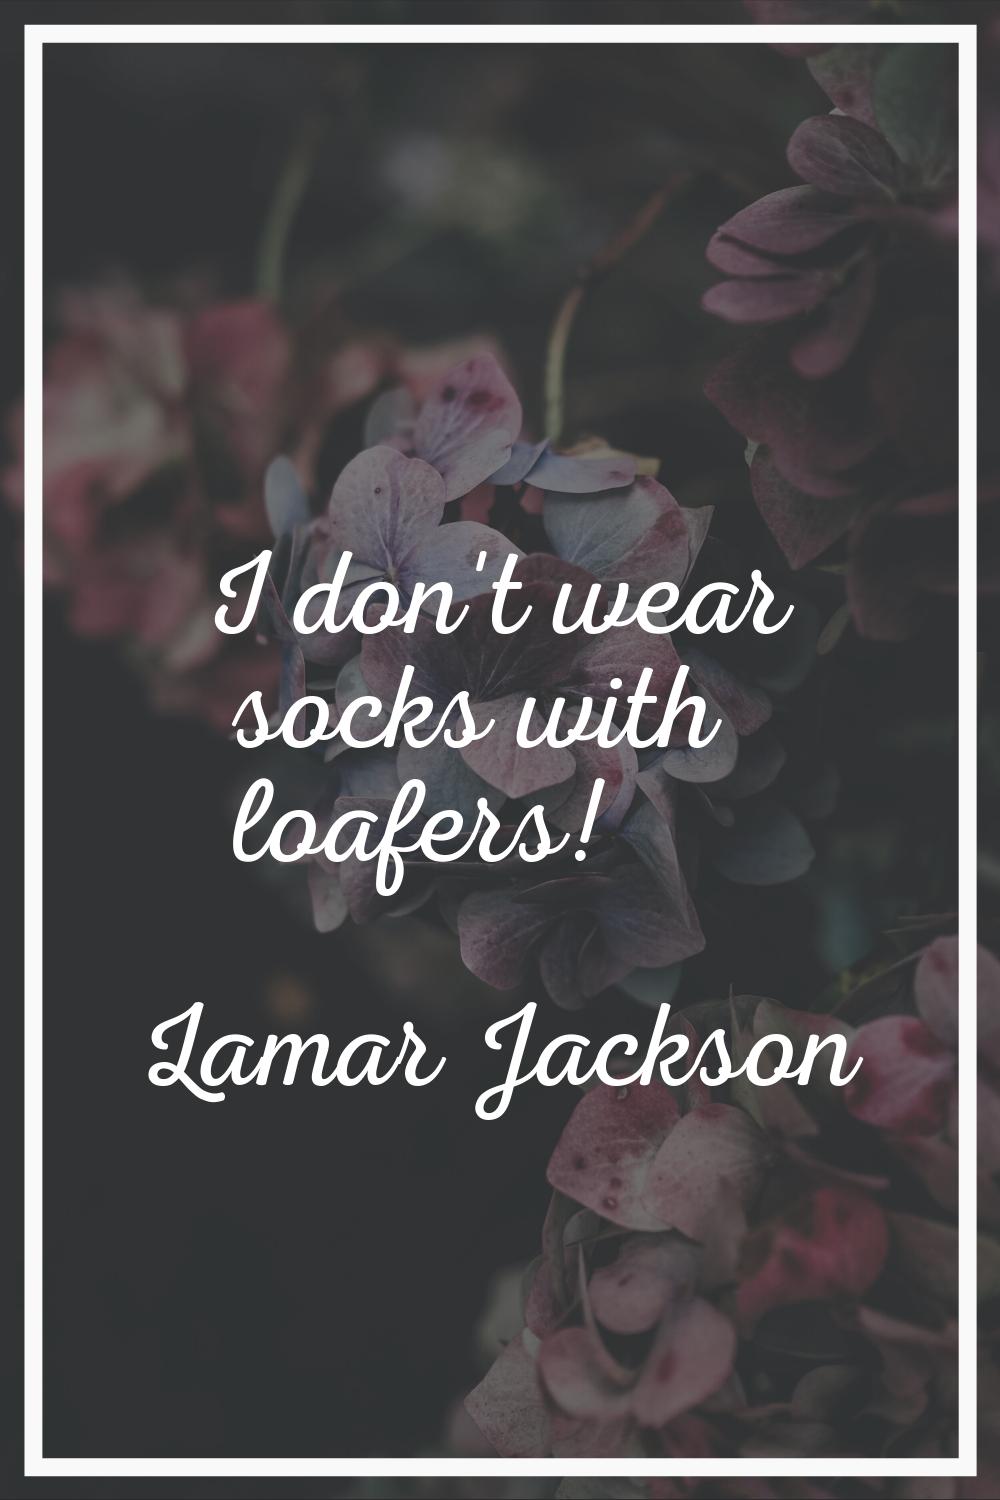 I don't wear socks with loafers!